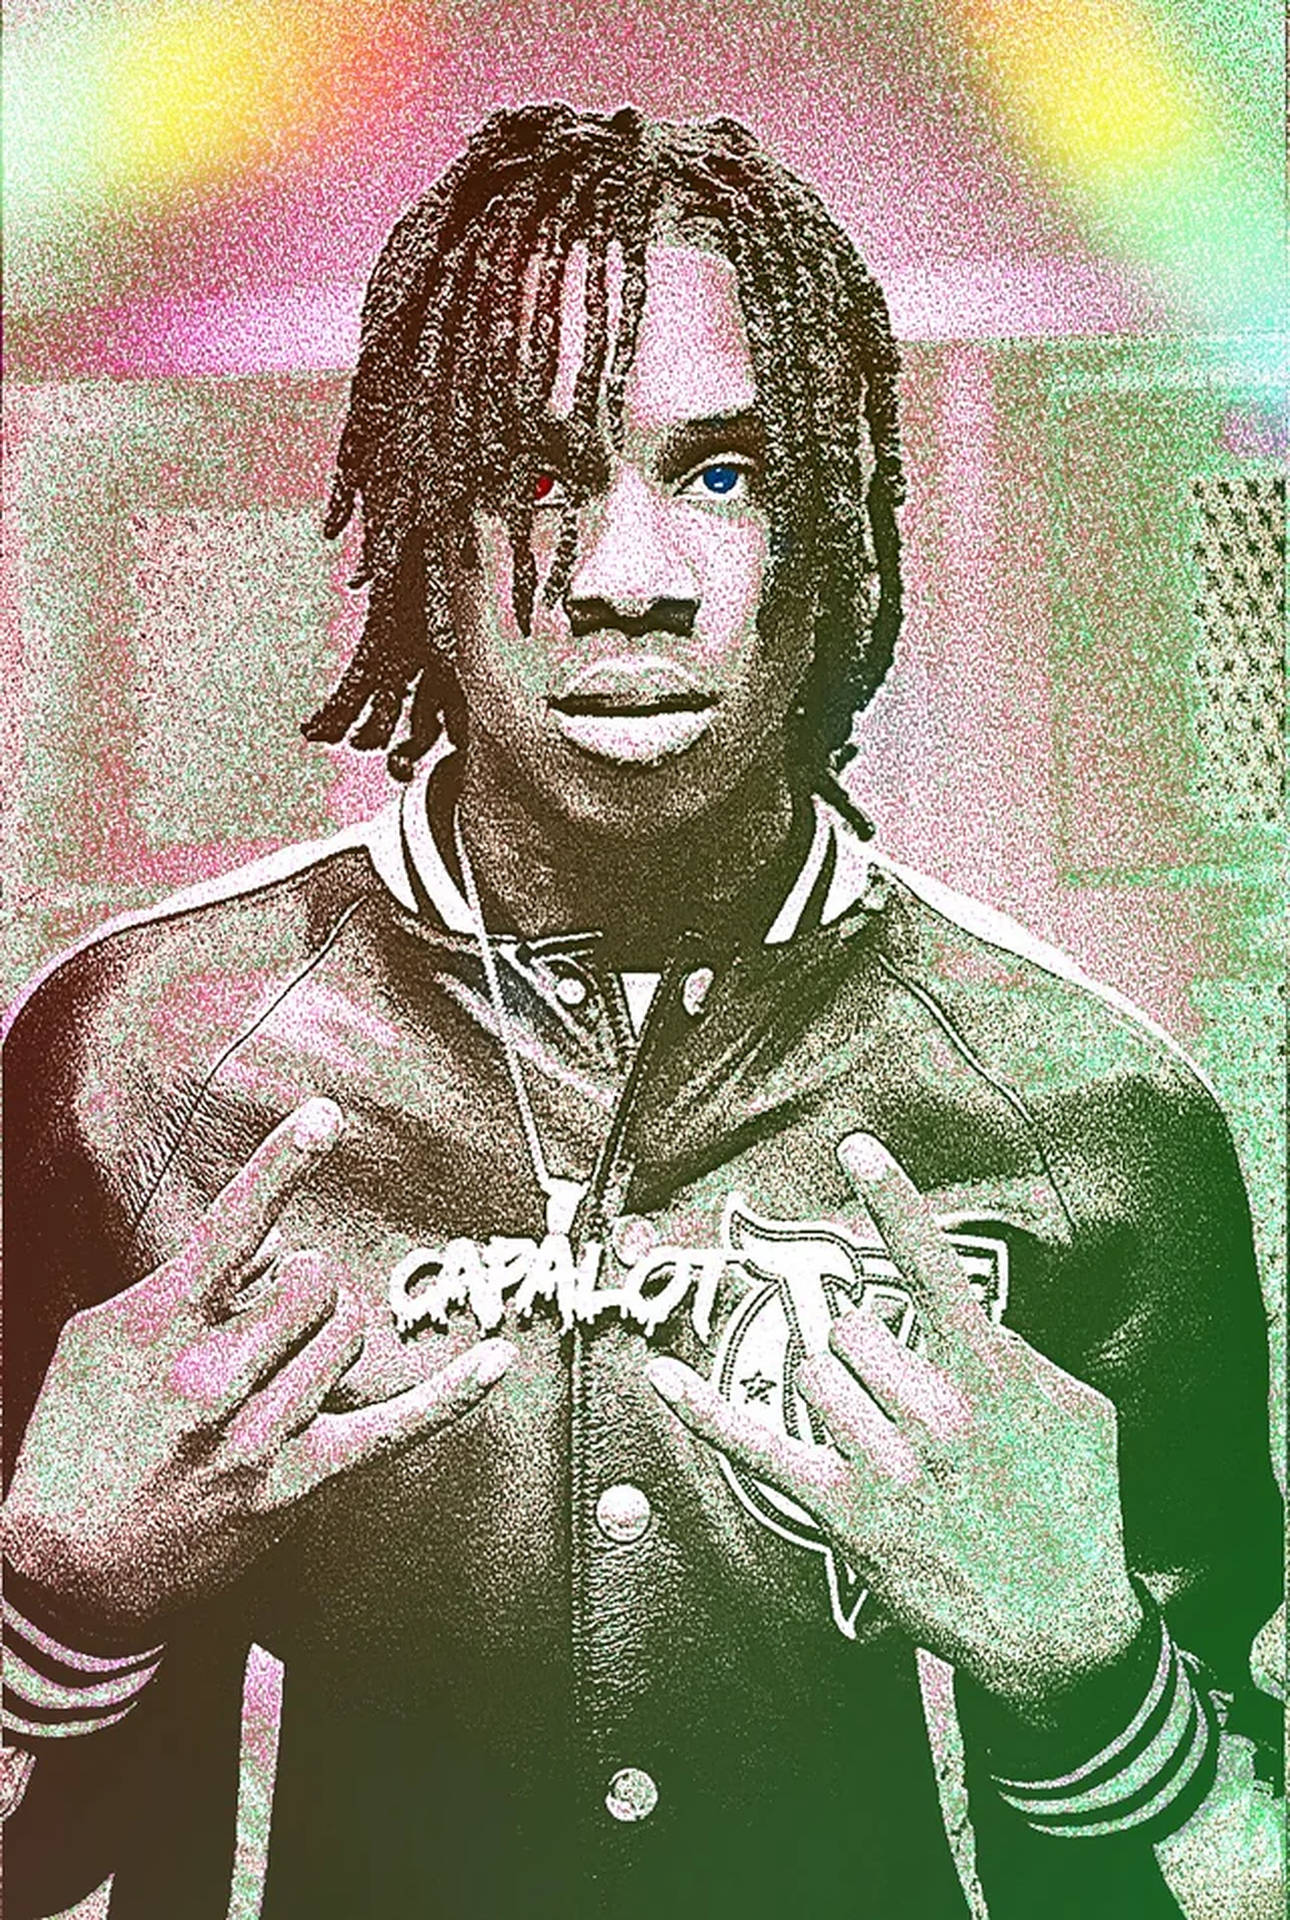 Polo G Psychedelic Art Wallpaper